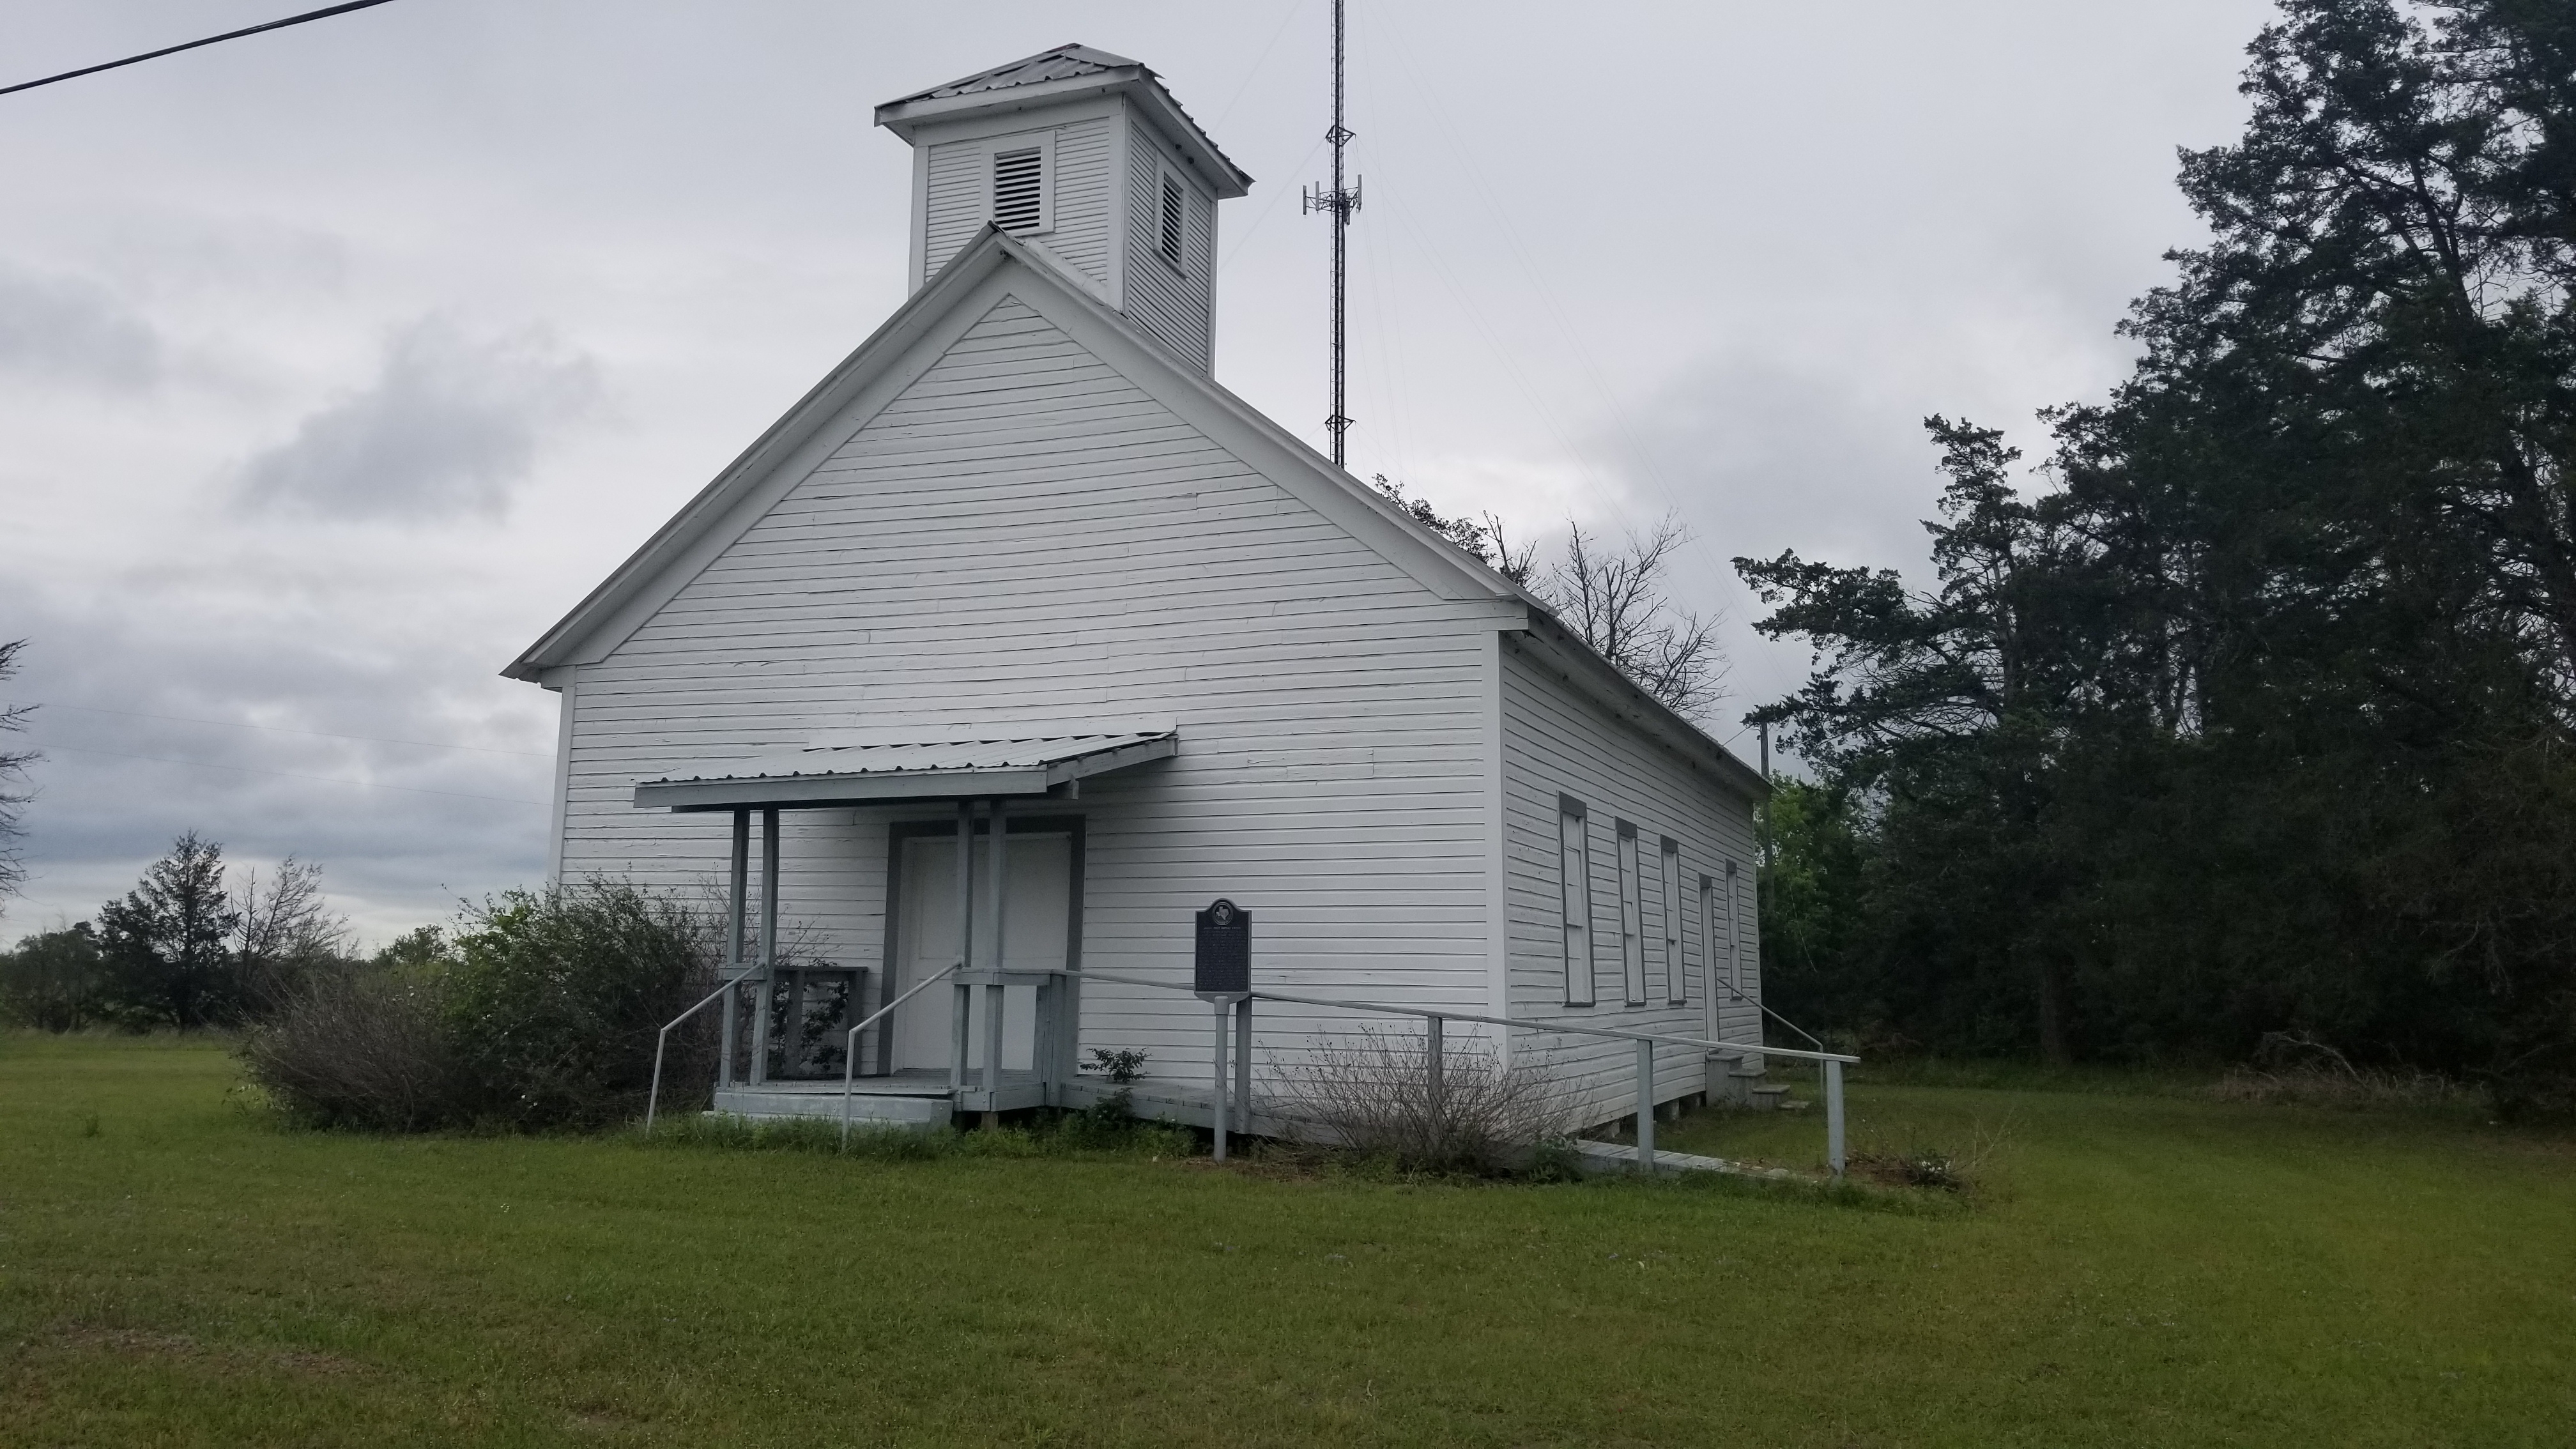 Bedias First Baptist Church and Marker